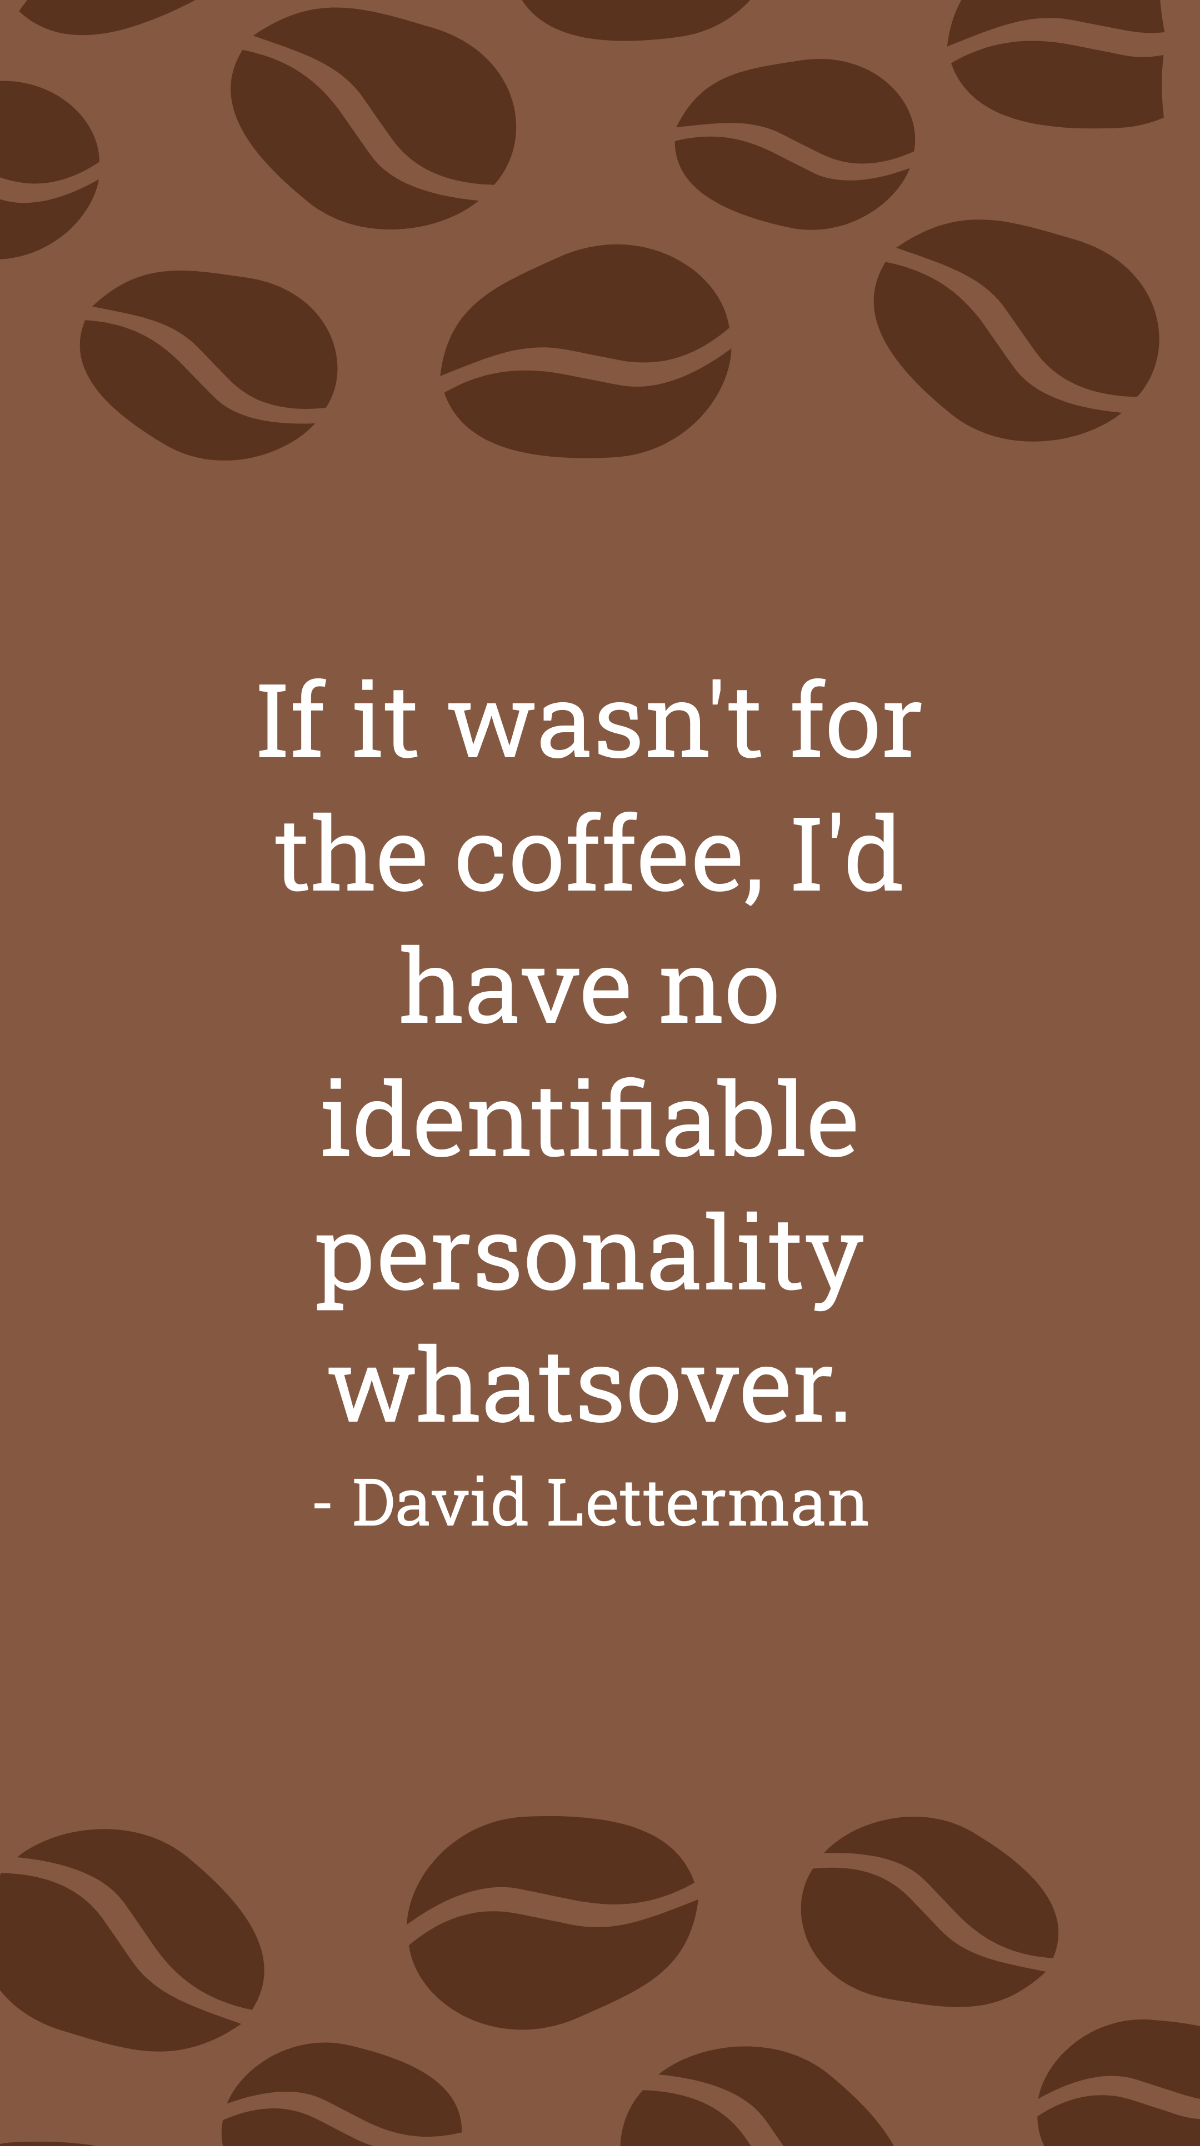 Free David Letterman - If it wasn't for the coffee, I'd have no identifiable personality whatsover. Template